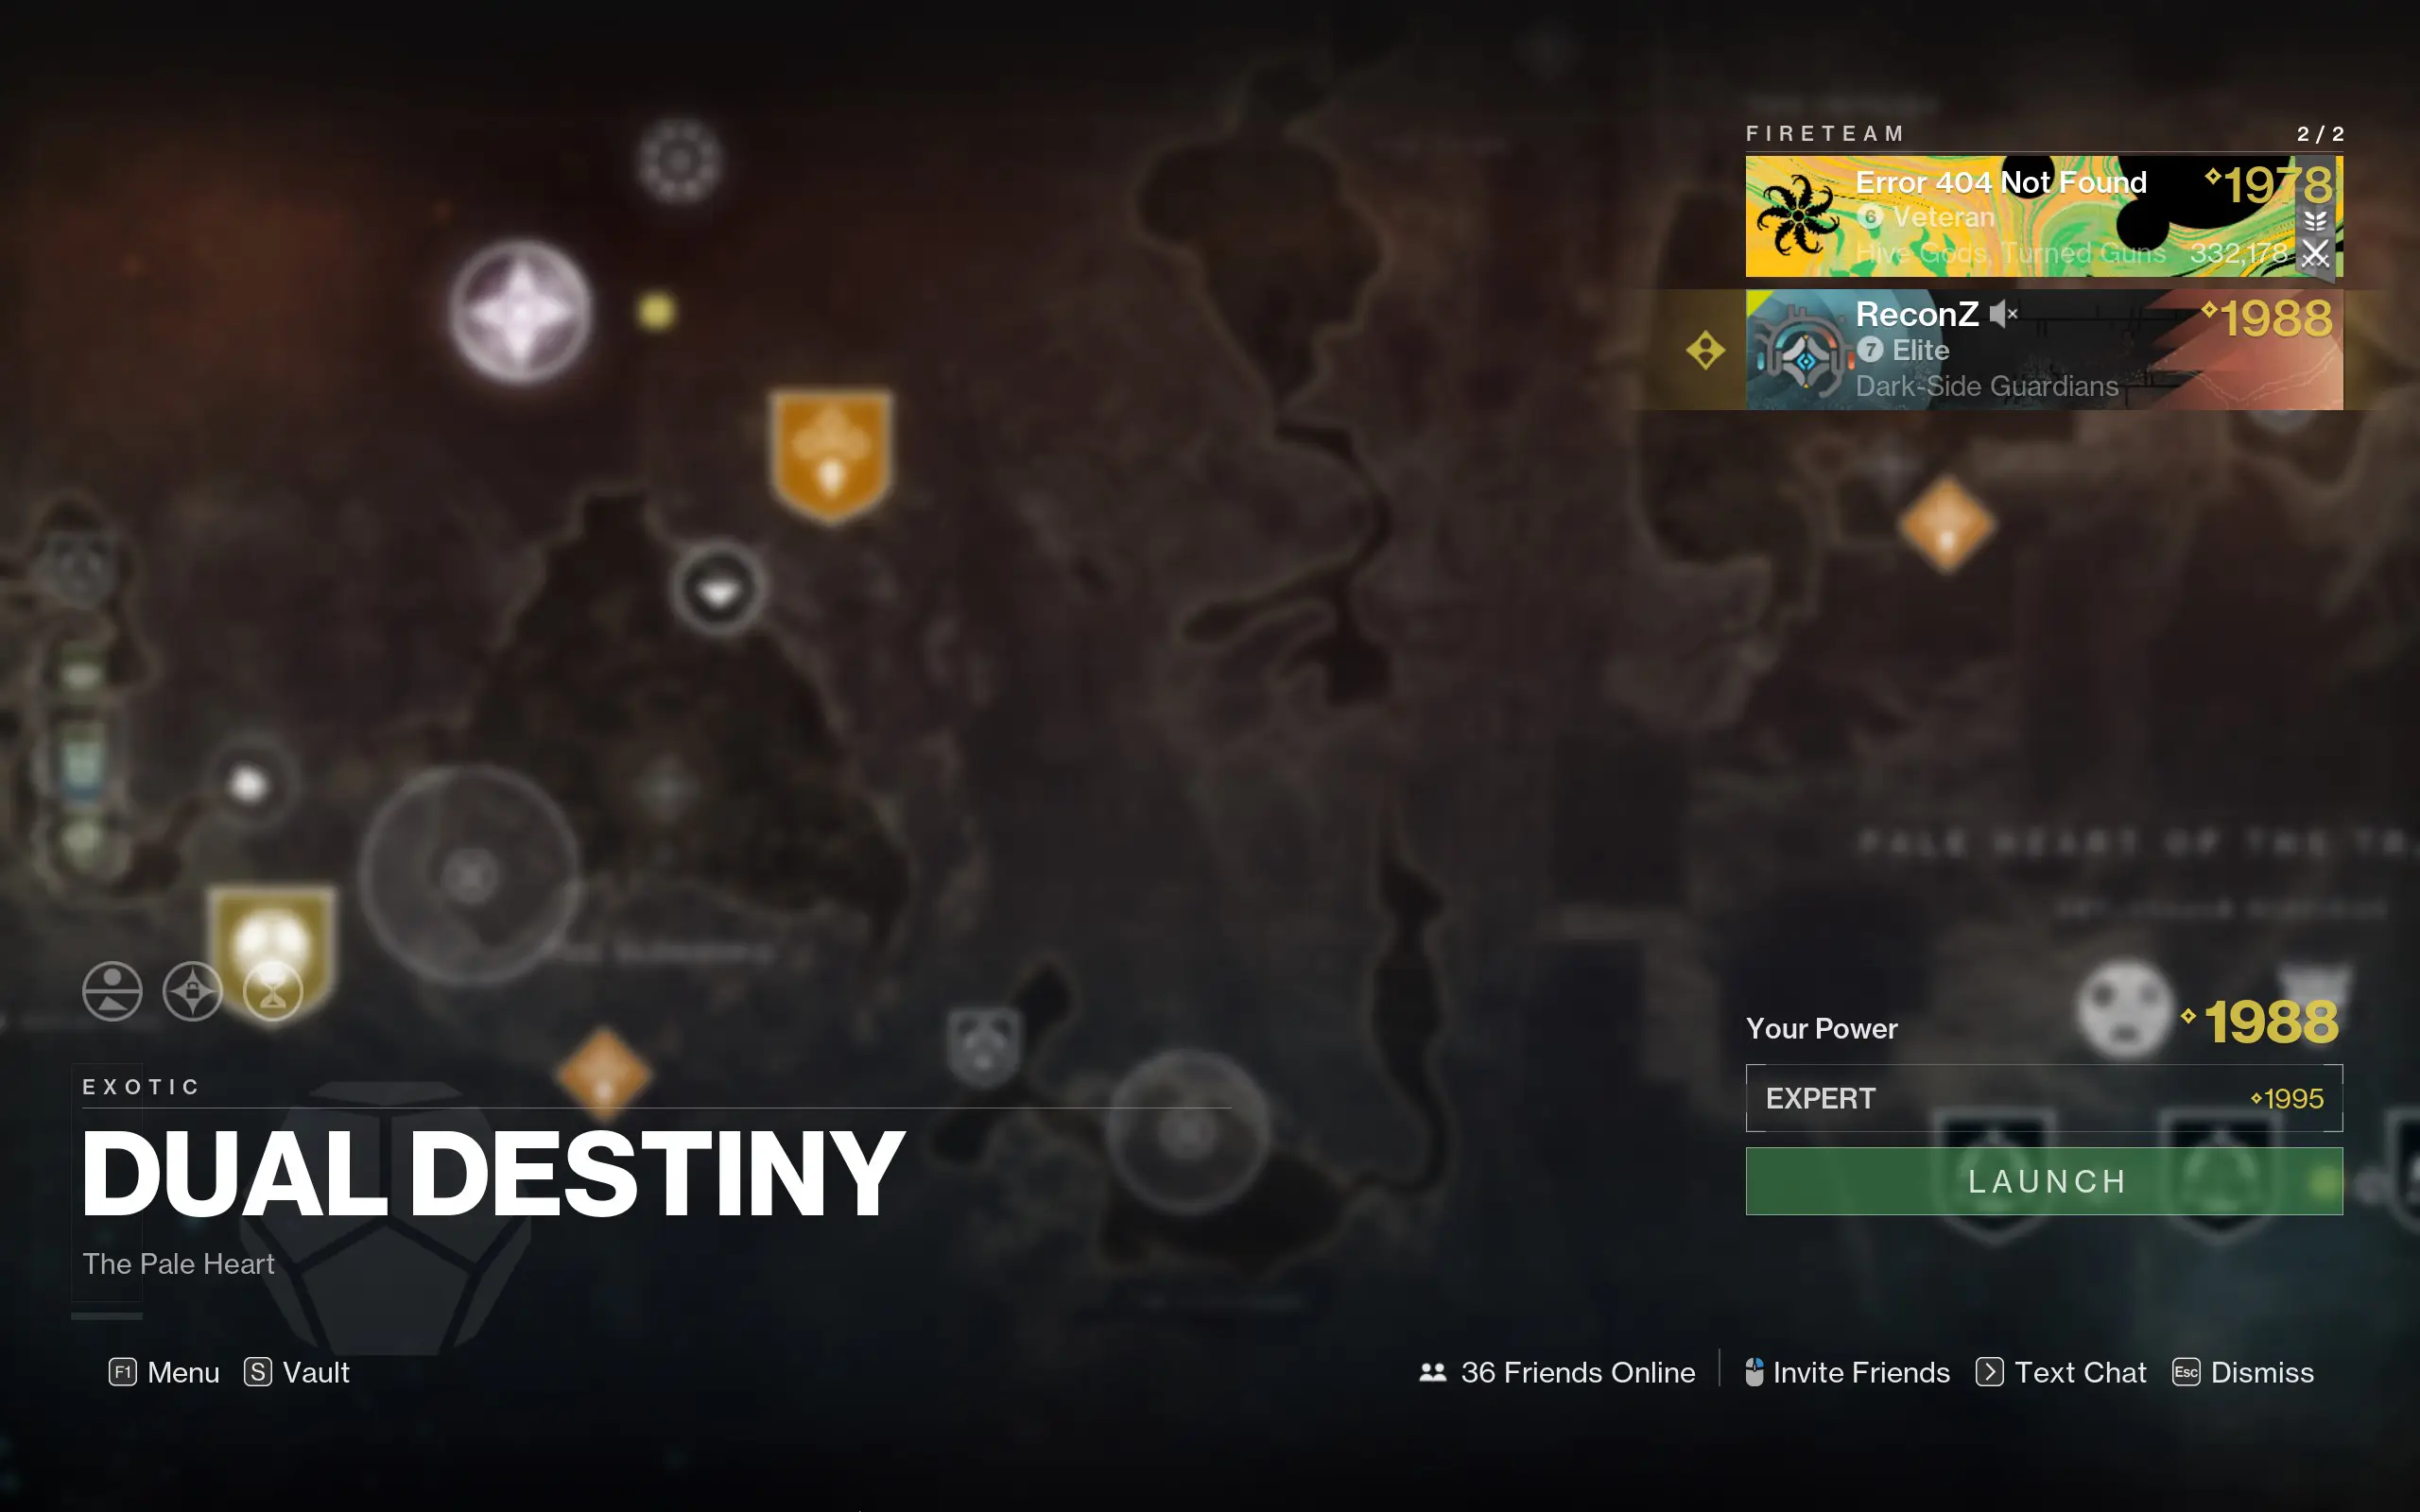 How to start the Dual Destiny Exotic Mission in Destiny 2?